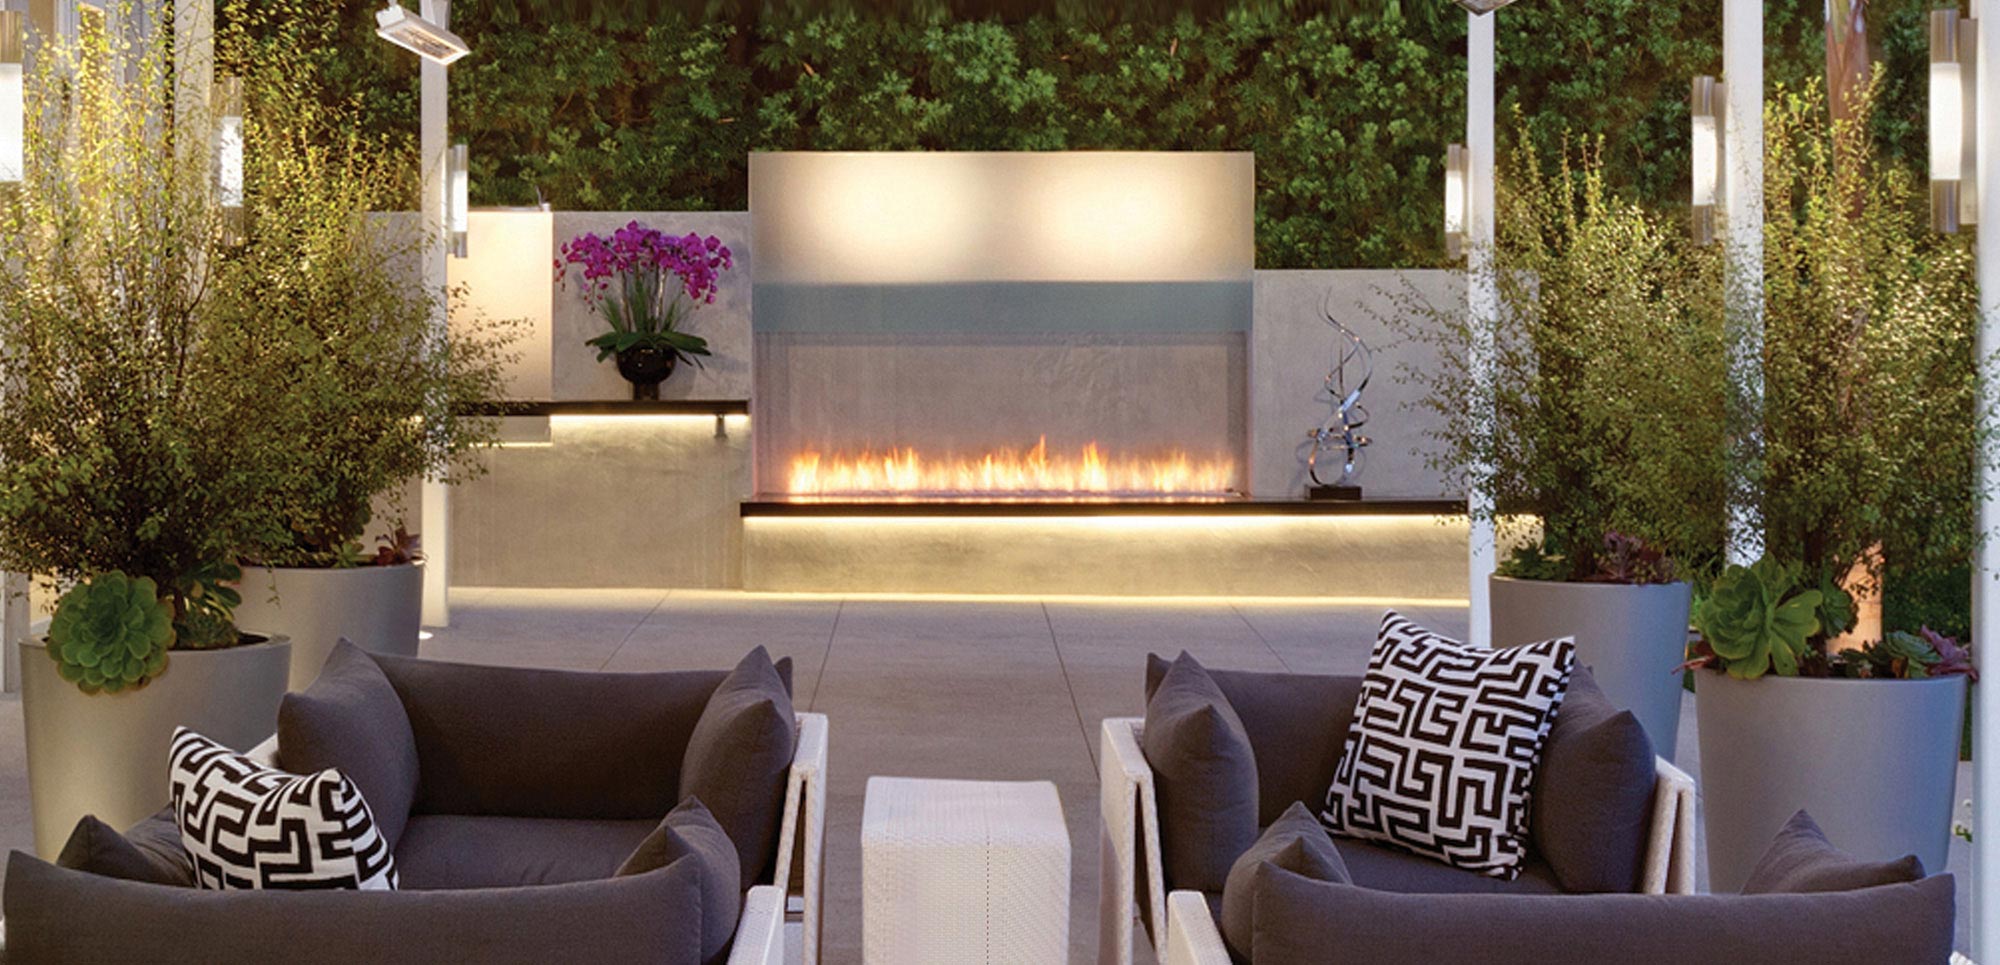 Spark Modern Fires offers the best selection of modern gas fireplaces. Be inspired by our variety of fireplaces here and find the right one for you.